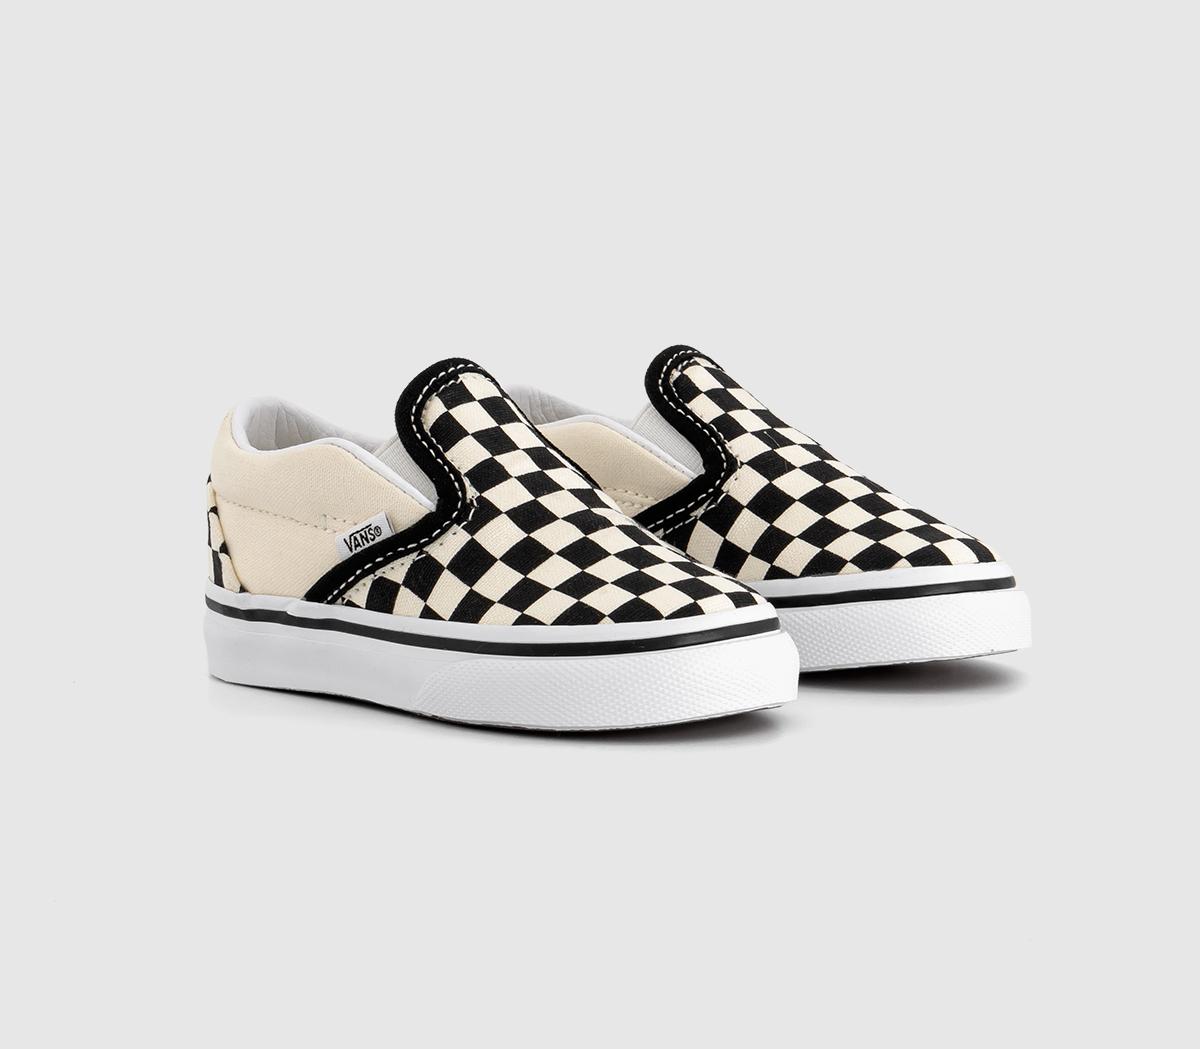 Vans Kids Toddlers Black And White Checkerboard Classic Slip On, Size: 7 Infant